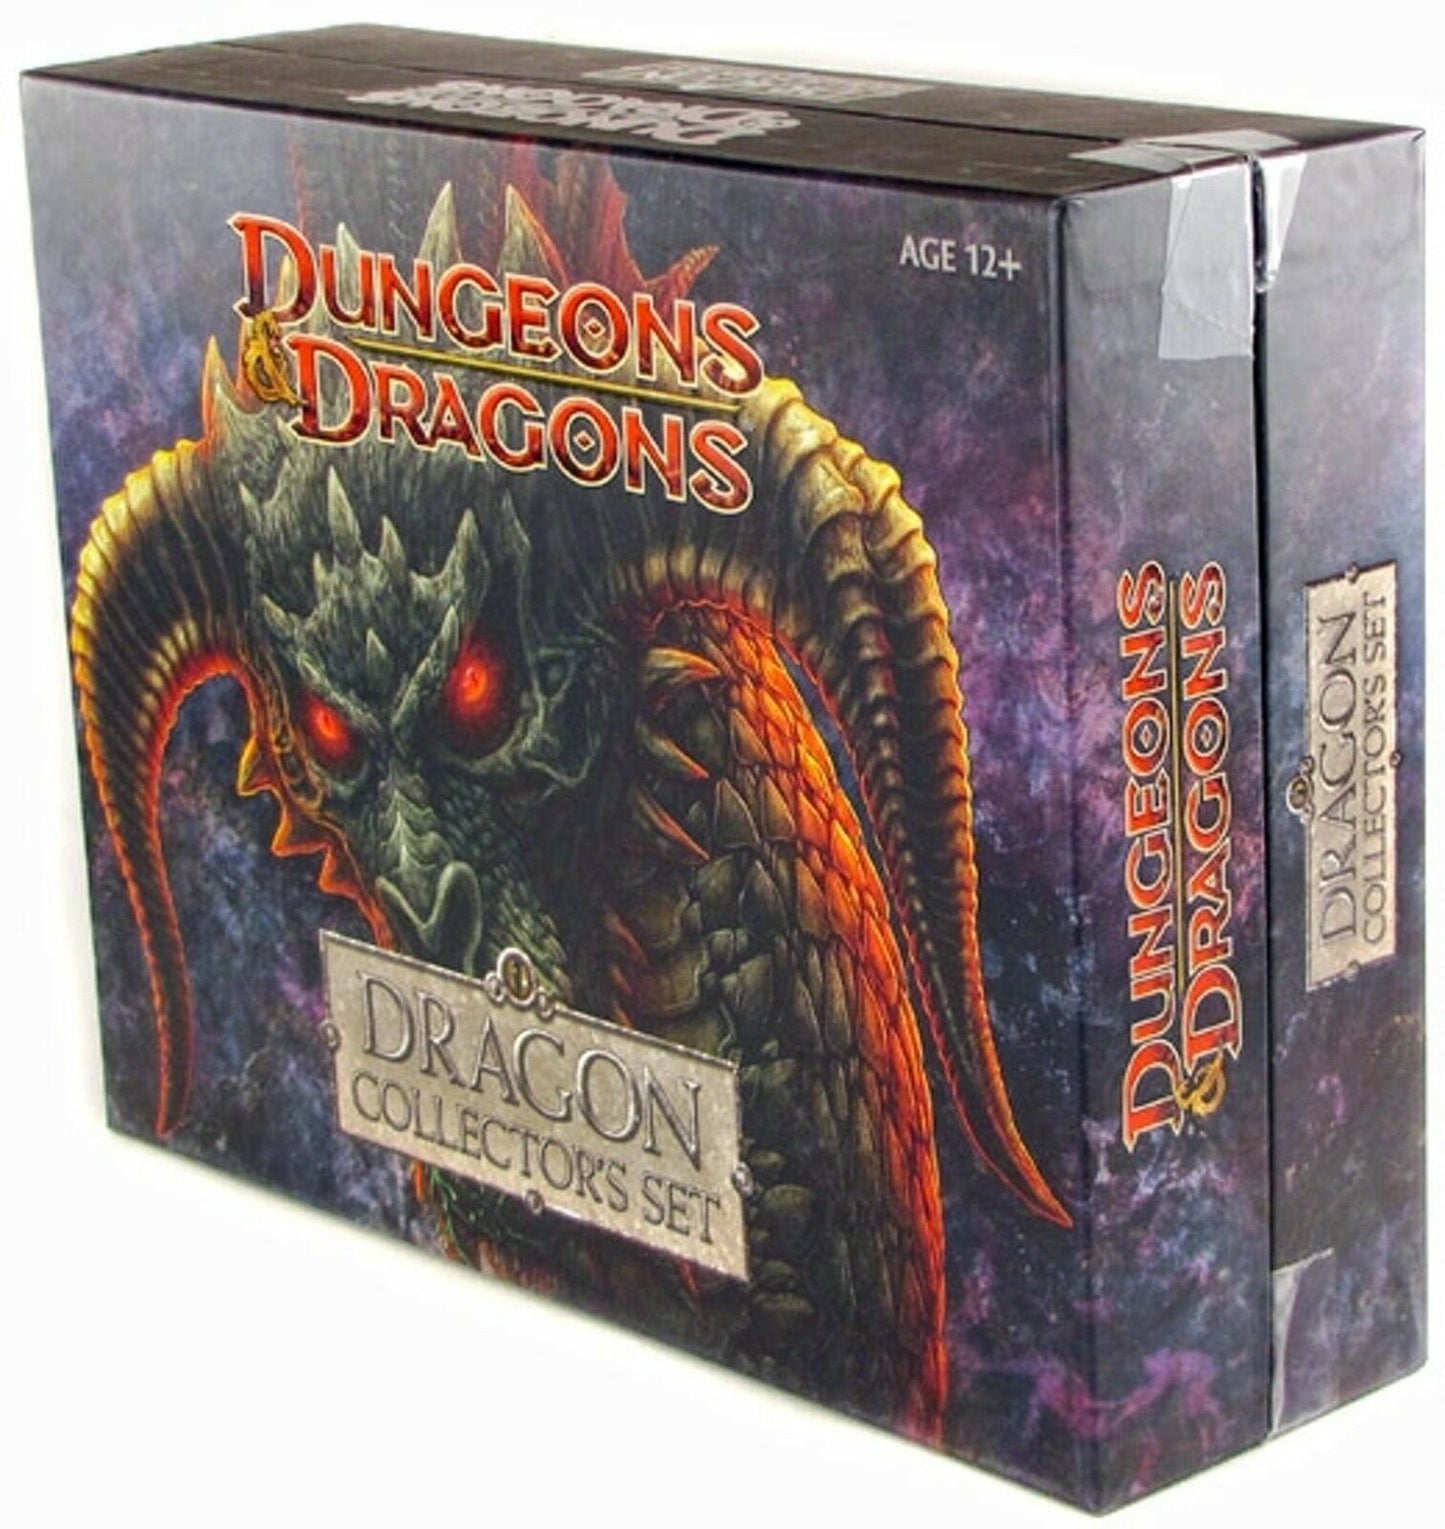 Dungeons & Dragons: Dragon Collector's Set